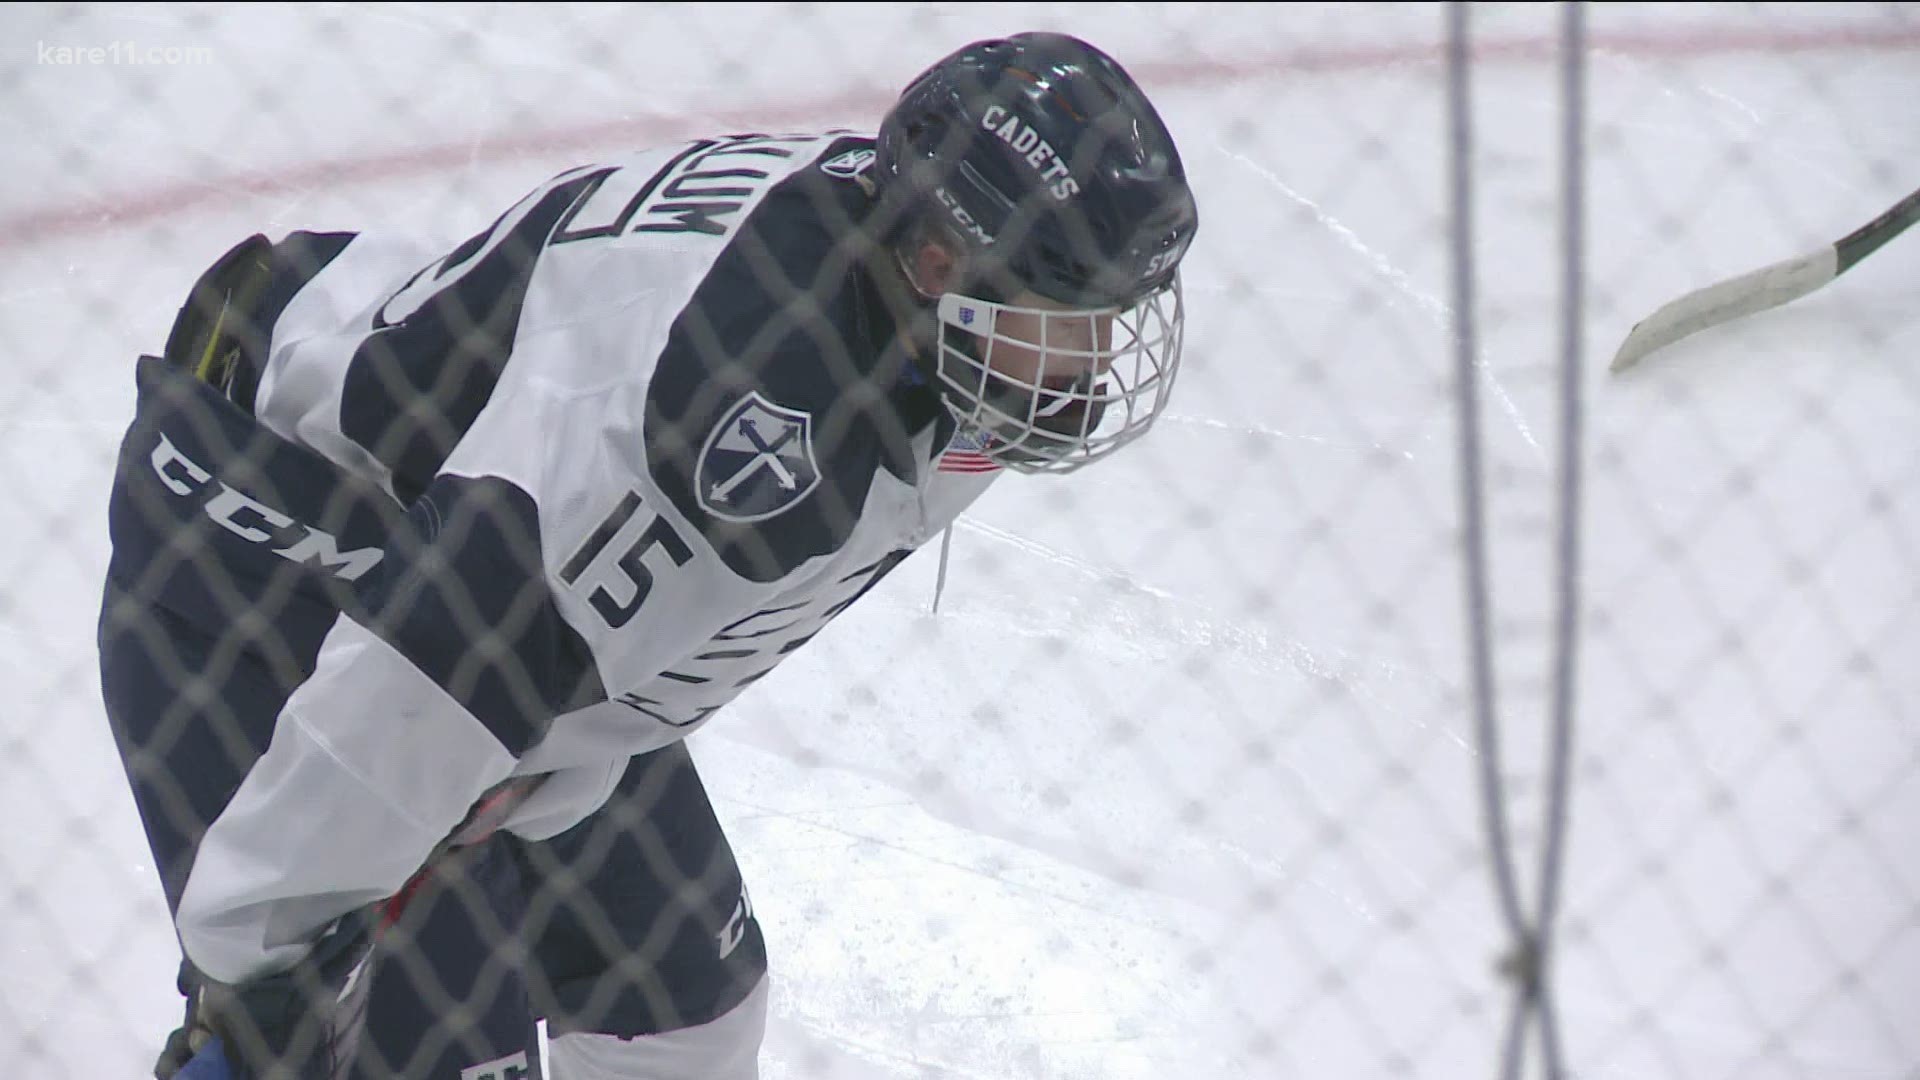 The St Thomas Academy senior may be the fastest high school hockey player in the state of Minnesota.